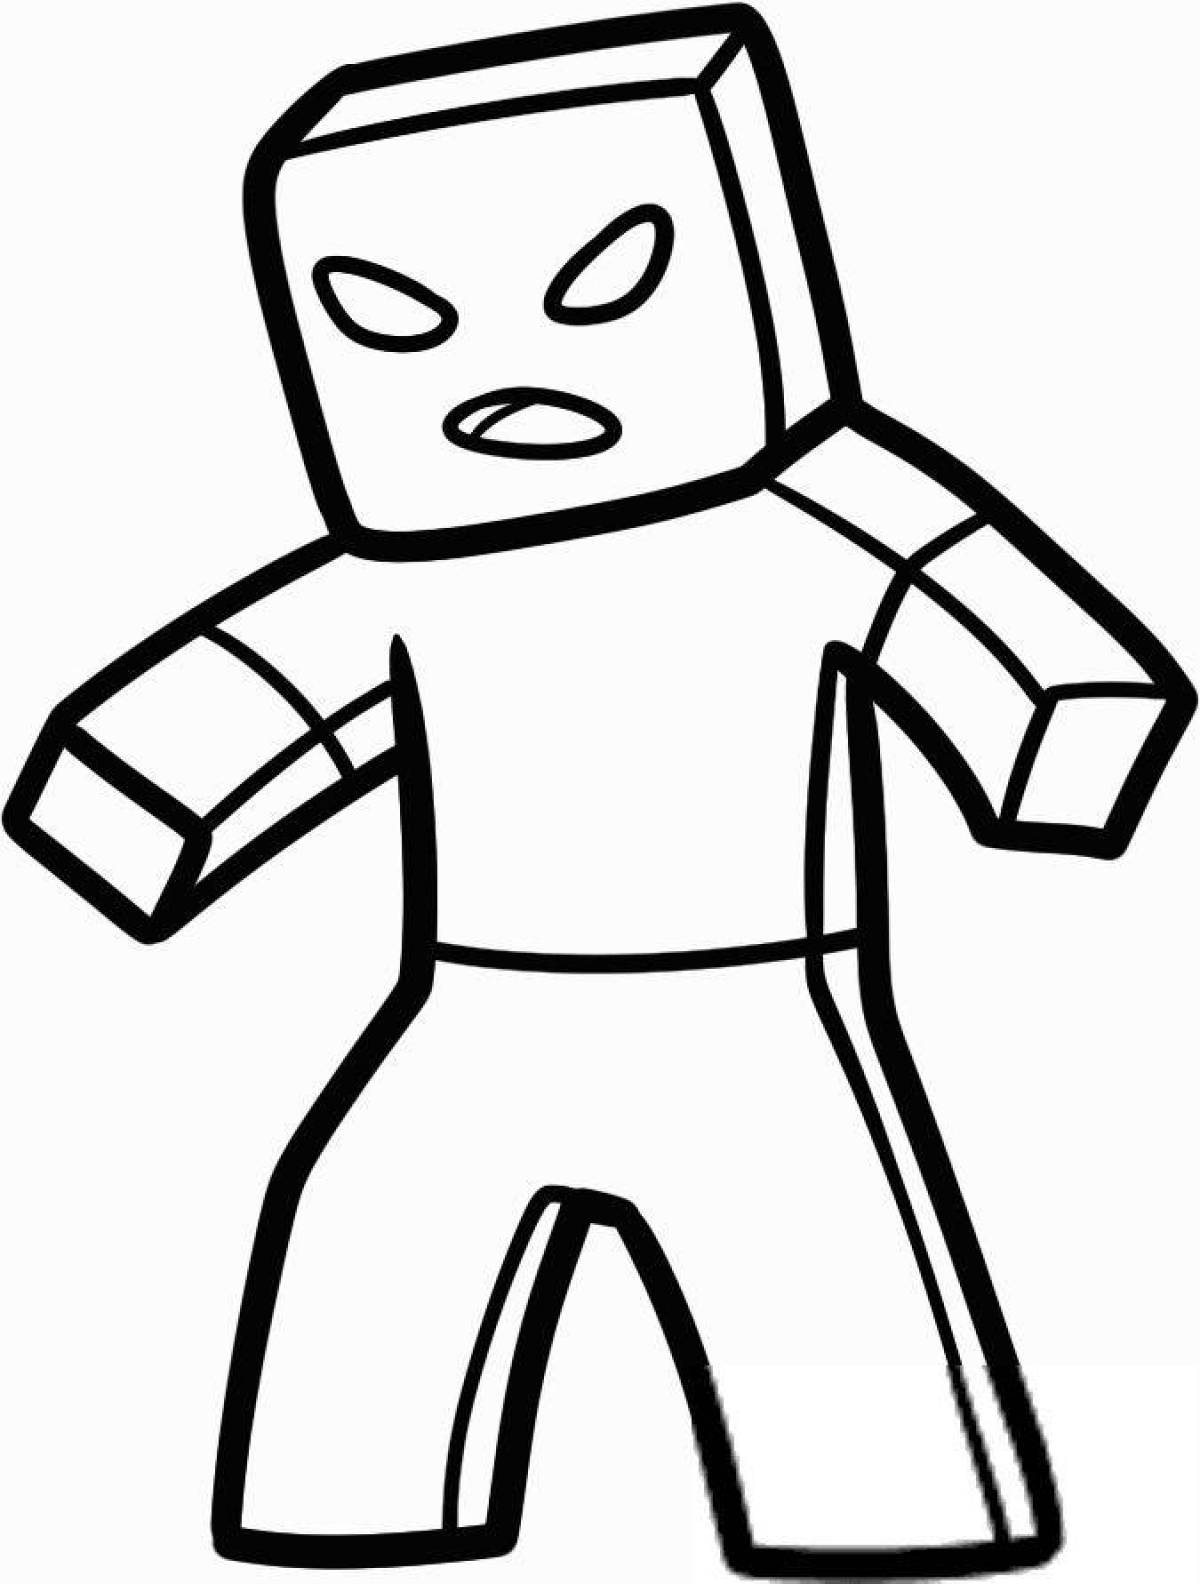 Animated minecraft zombie coloring page